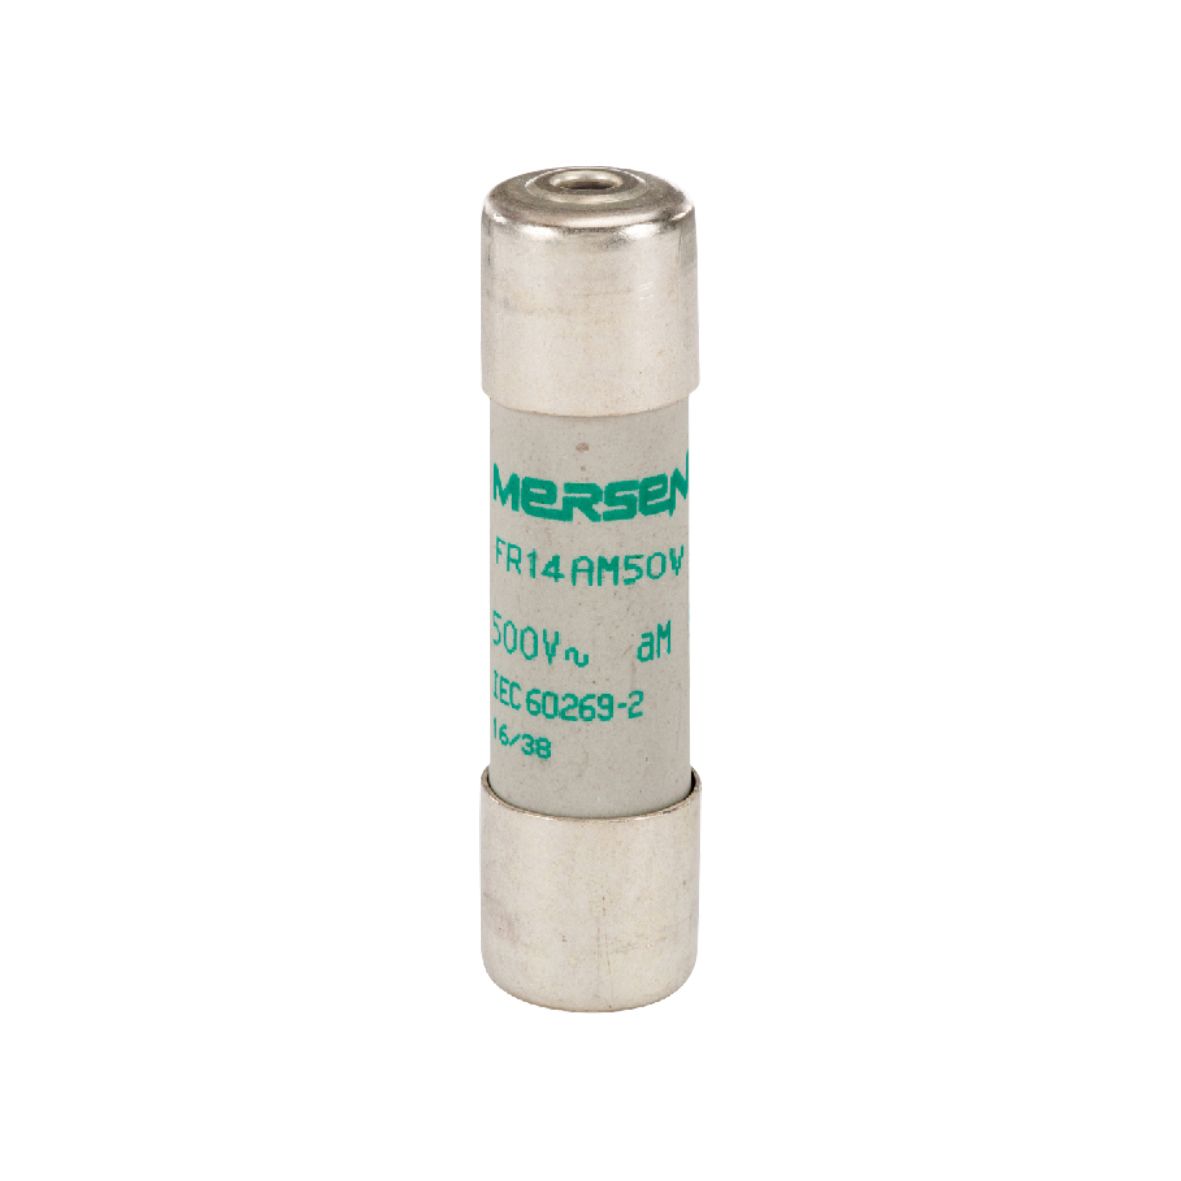 W215644 - Cylindrical fuse-link aM 500VAC 14.3x51, 1A with striker